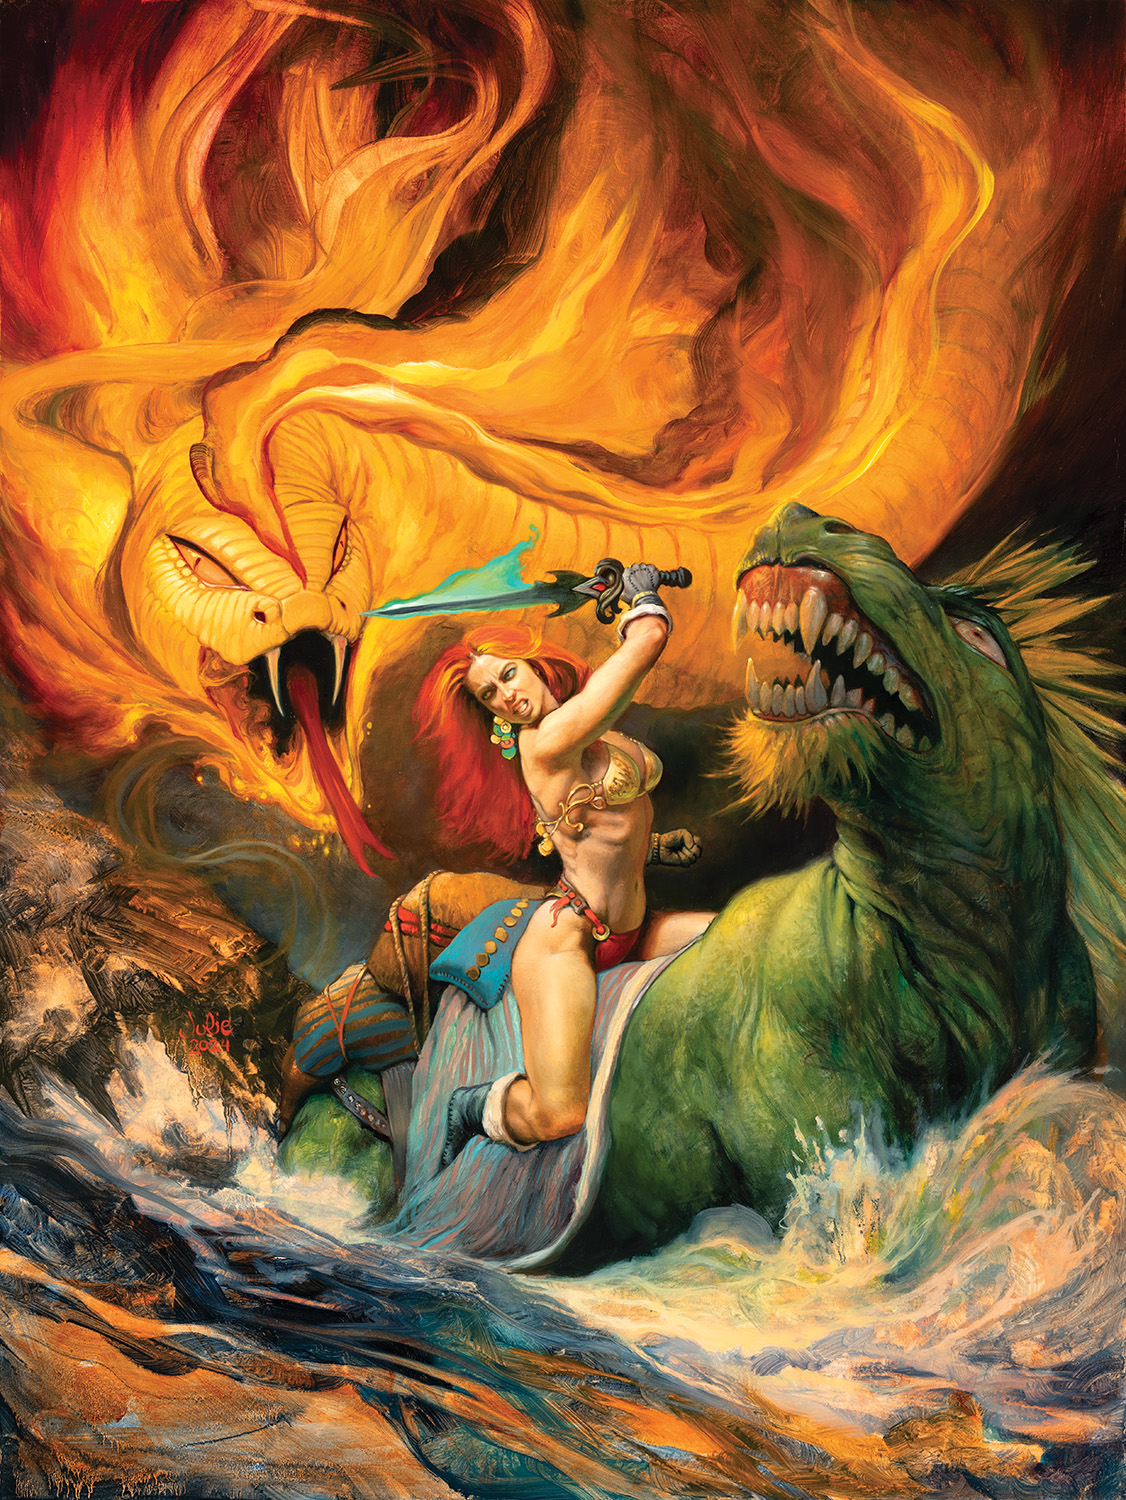 A warrior woman riding a mystical horse in the ocean while fighting a snake.